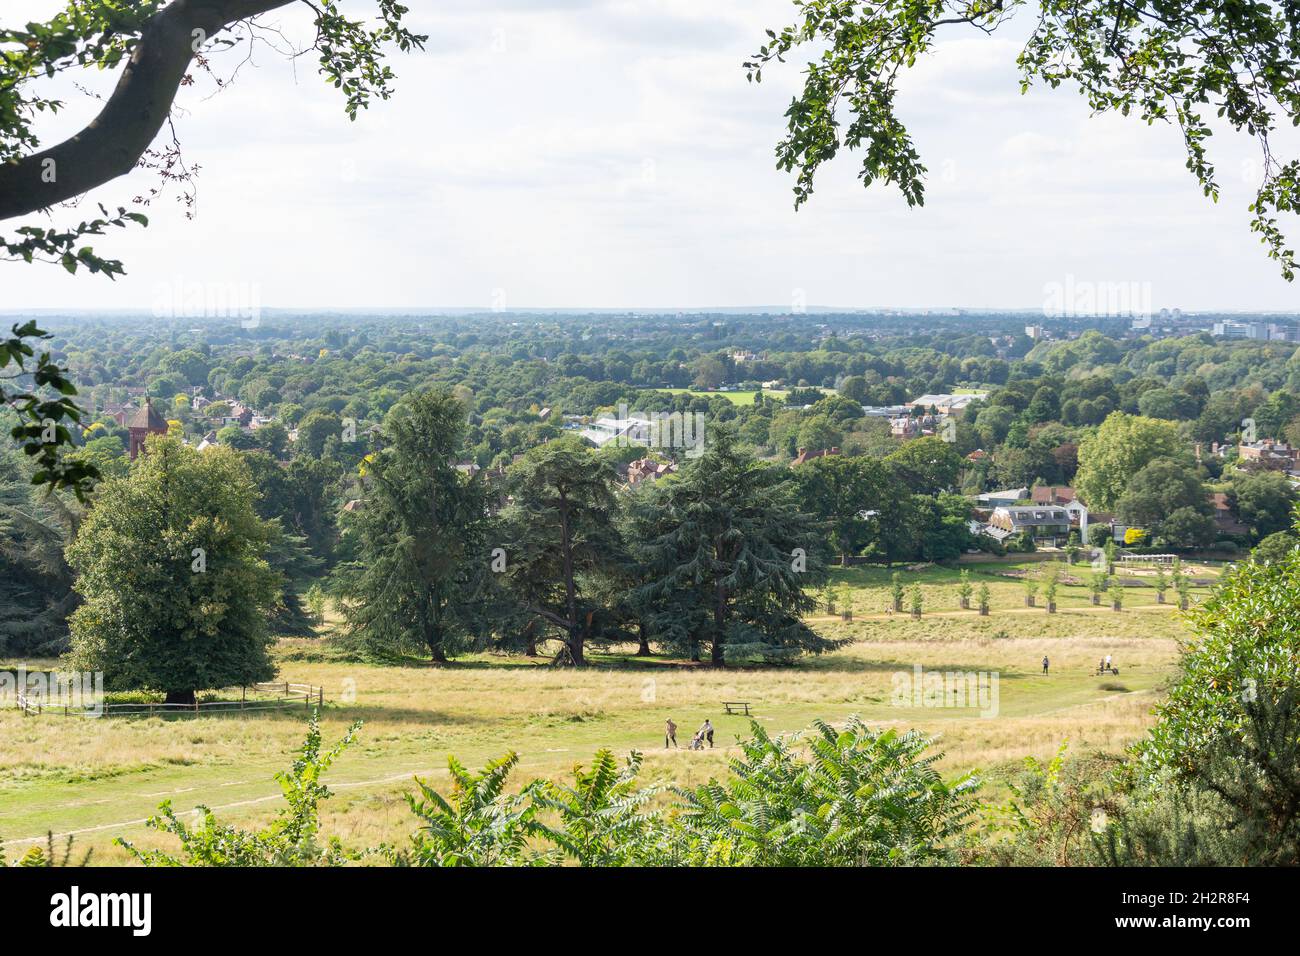 Panoramic view from King Henry's Mount, Pembroke Lodge Garden, Richmond Park, Borough of Richmond upon Thames, Greater London, England, United Kingdom Stock Photo